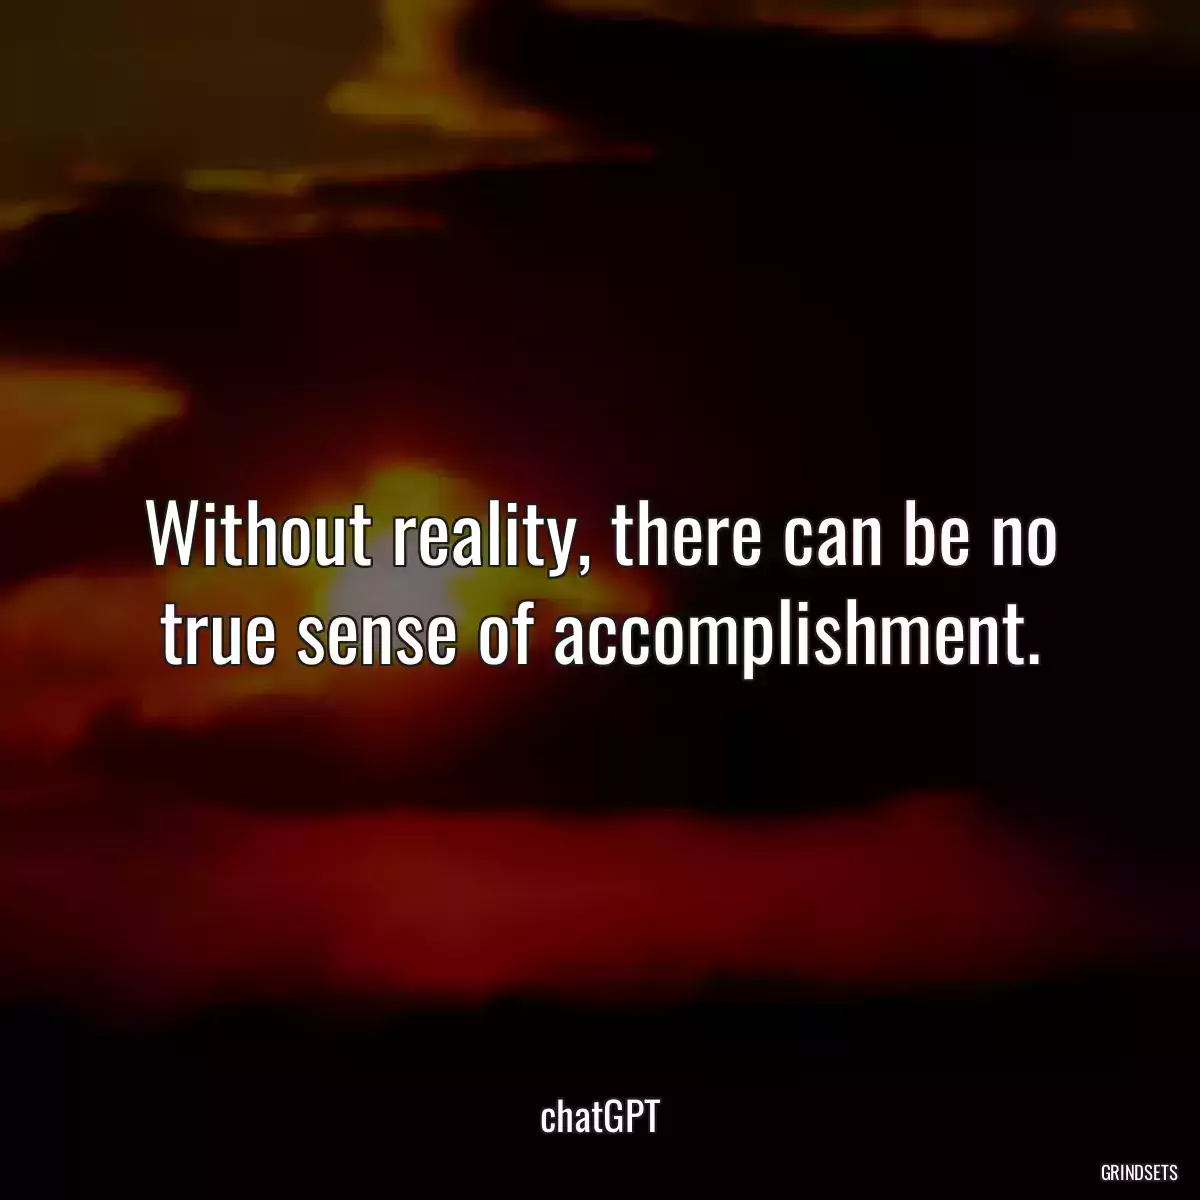 Without reality, there can be no true sense of accomplishment.